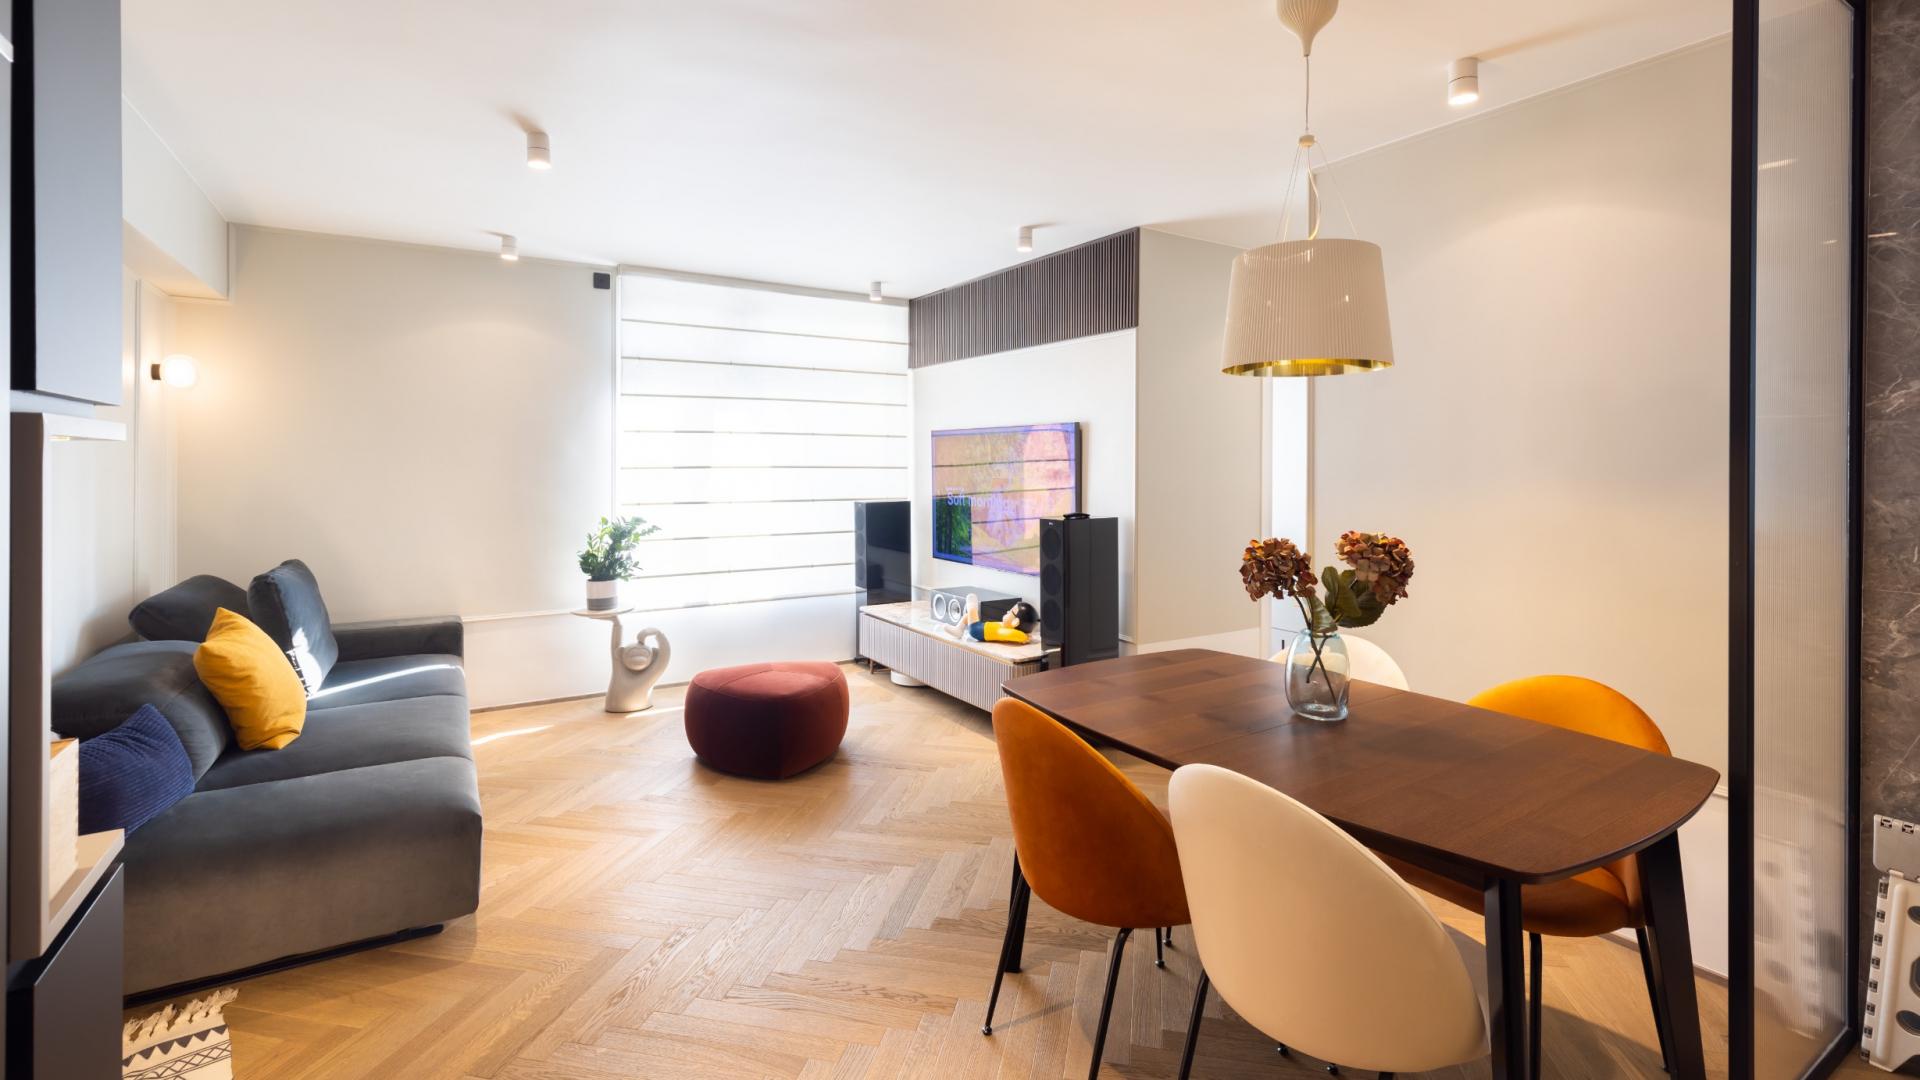 This 583 sq. ft. flat in Taikoo Shing is minimalism at its most inviting